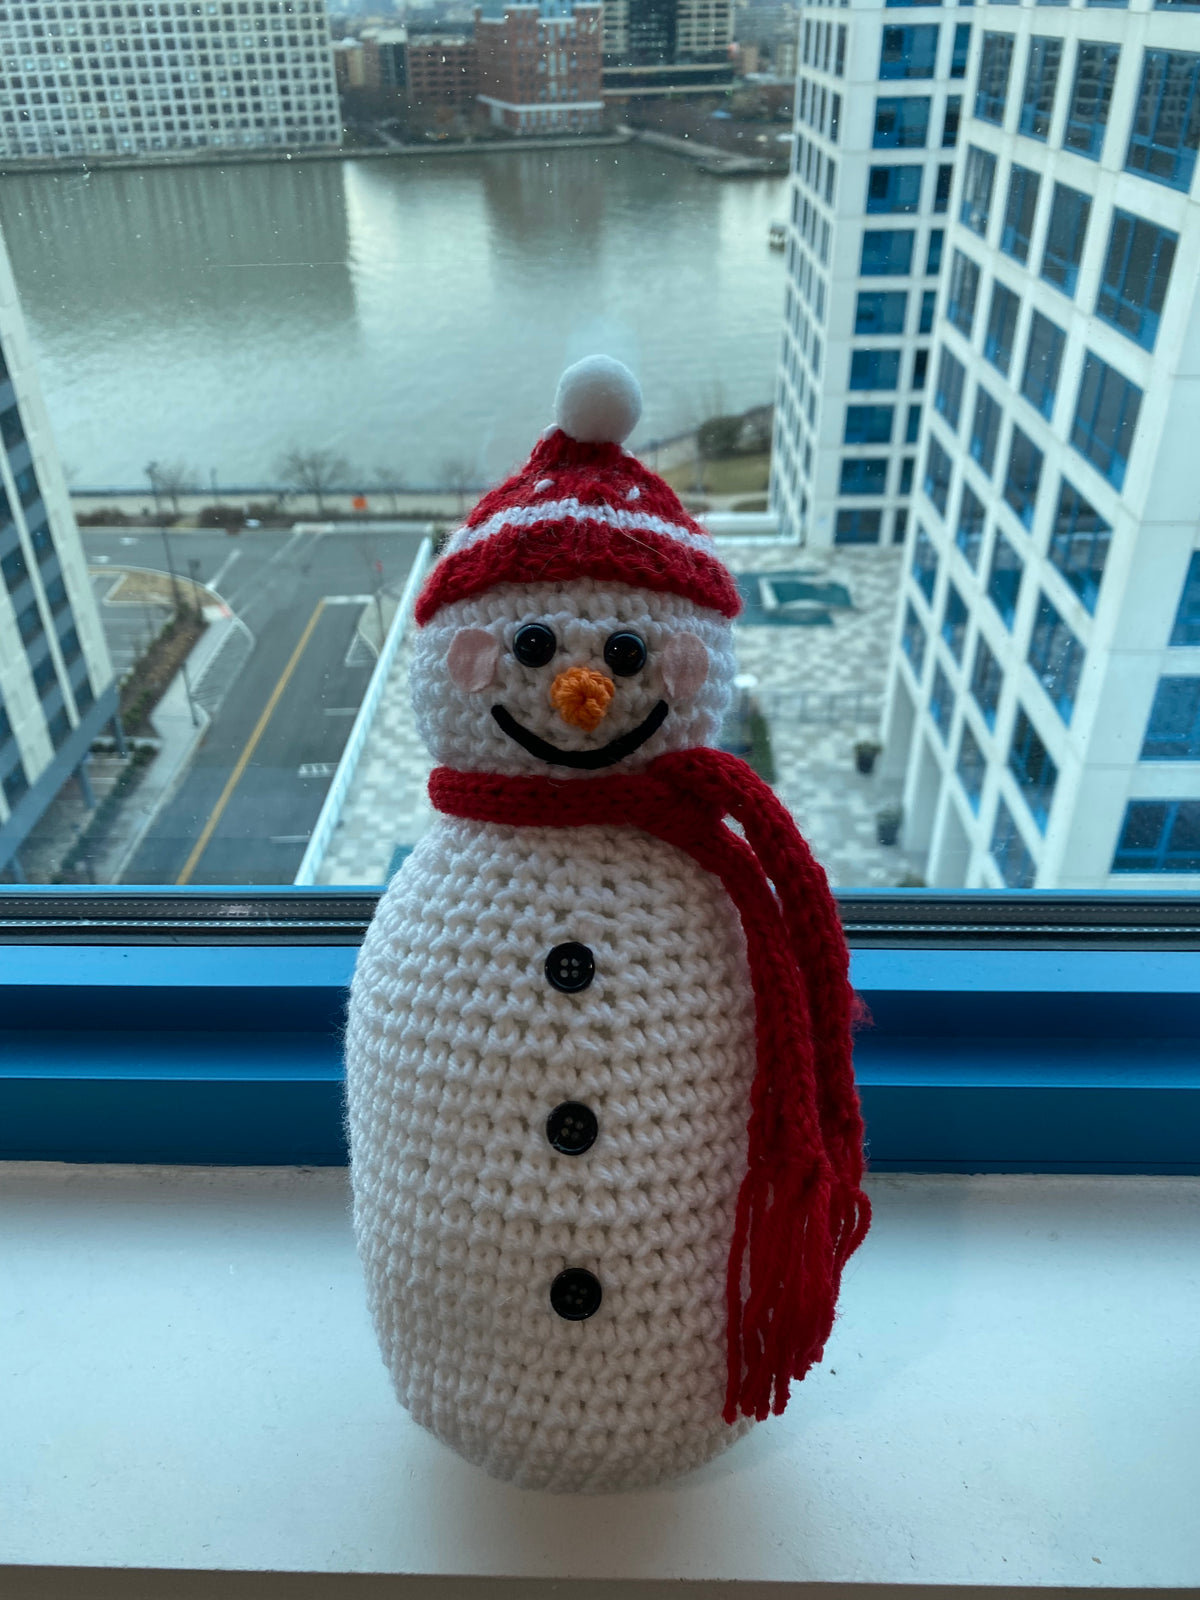 Cute crocheted snowman with red and white beanie and red scarf